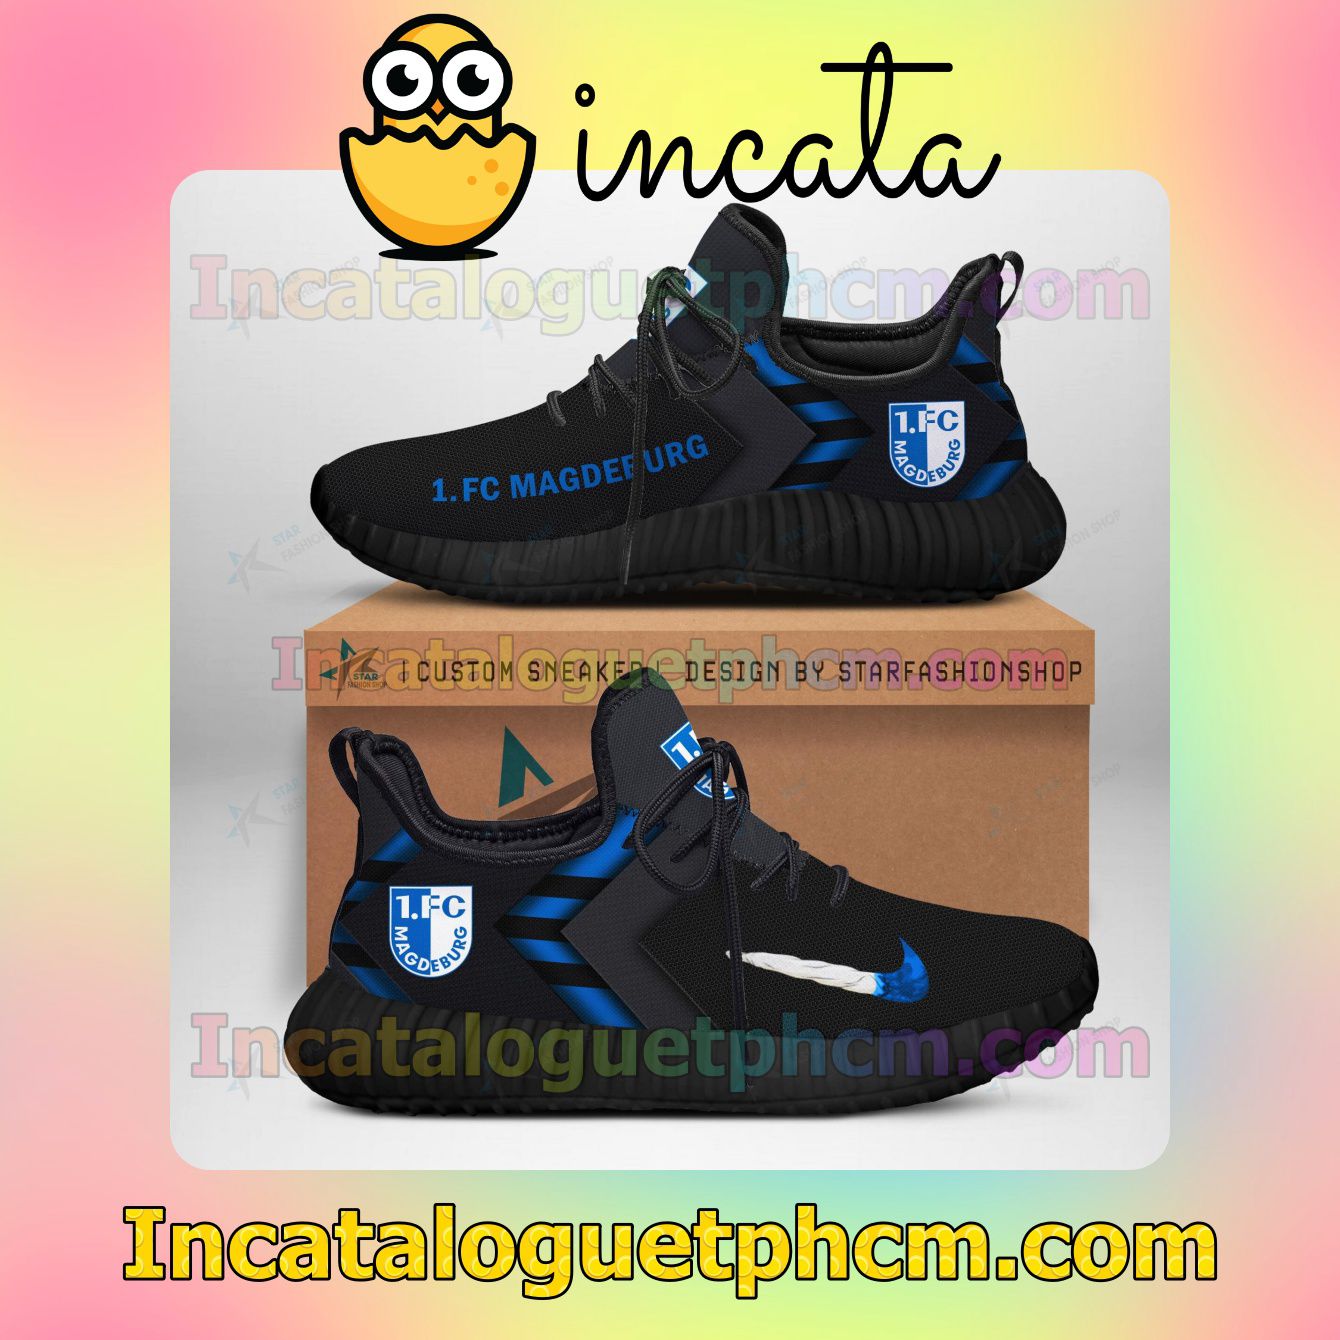 1. FC Magdeburg Ultraboost Yeezy Shoes Sneakers